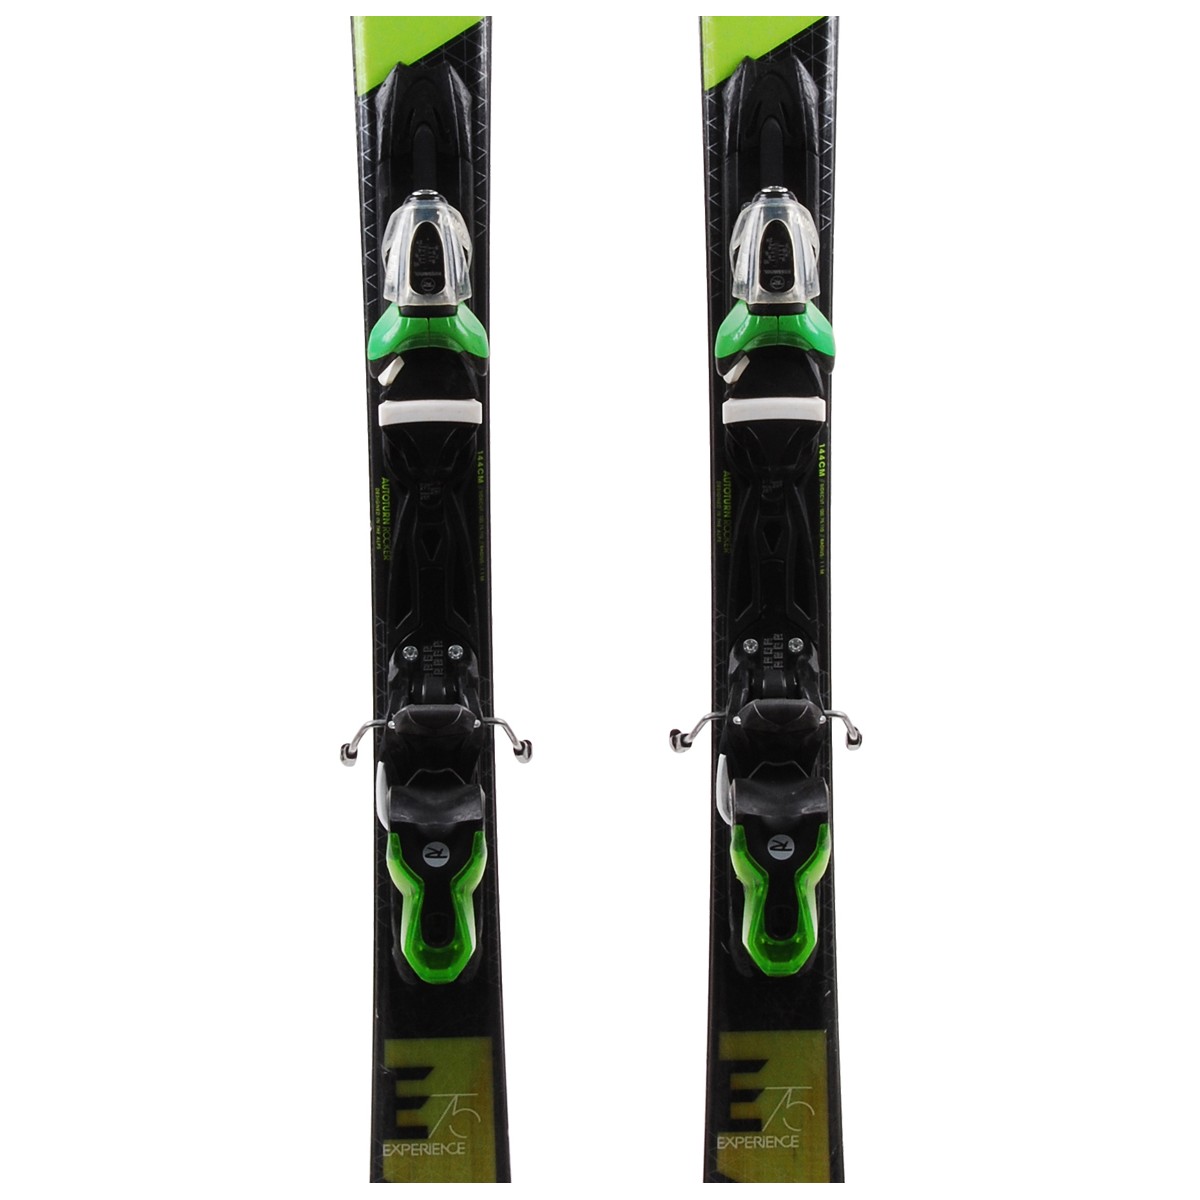 rossignol experience 75 review